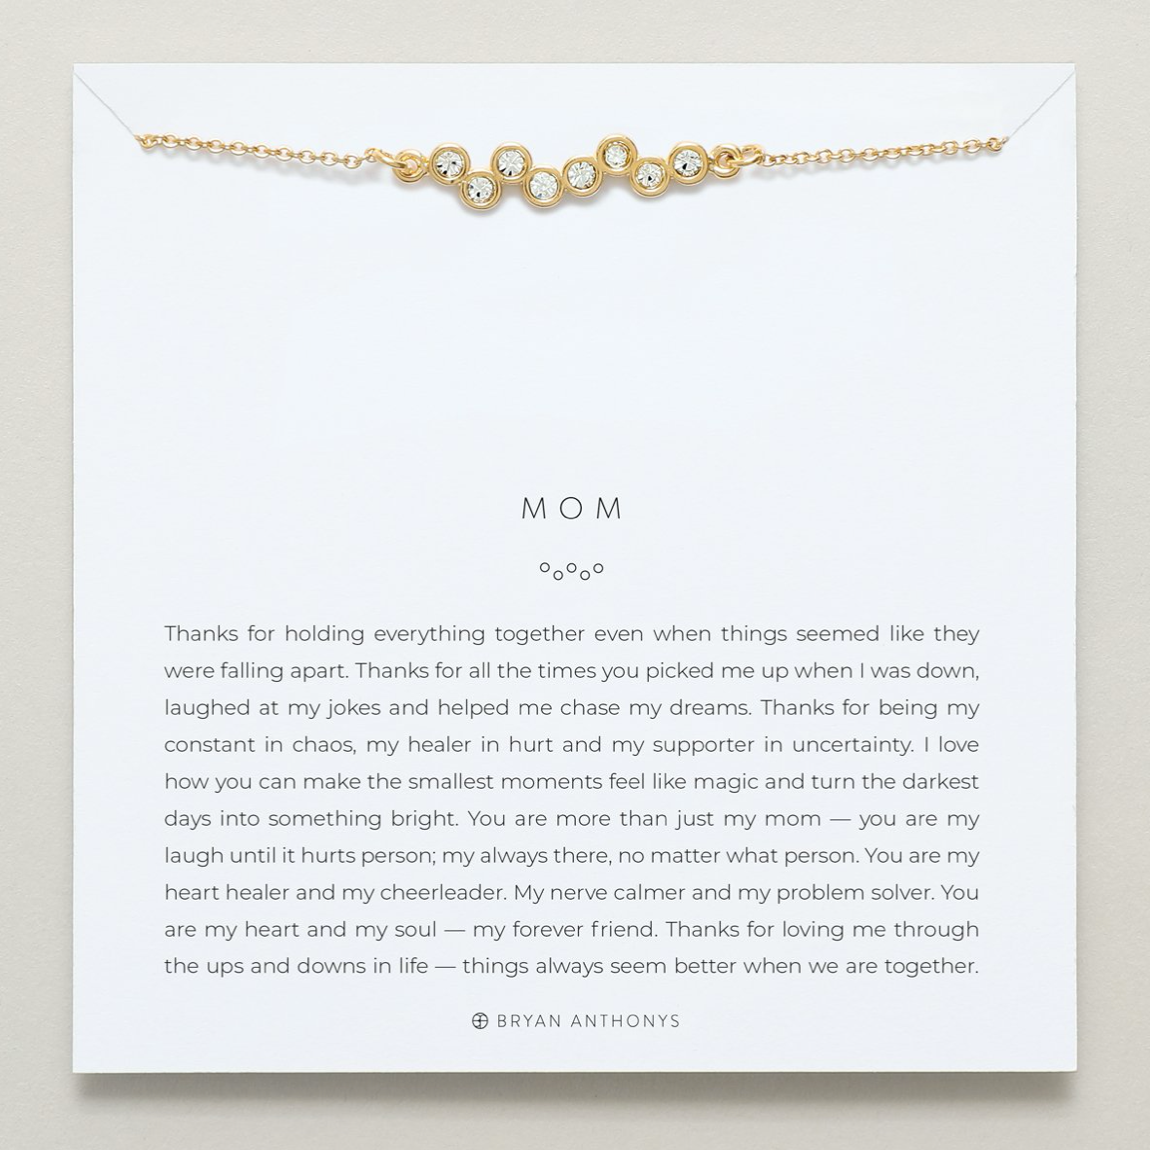 Bryan Anthonys: Meaningful Jewelry for Her